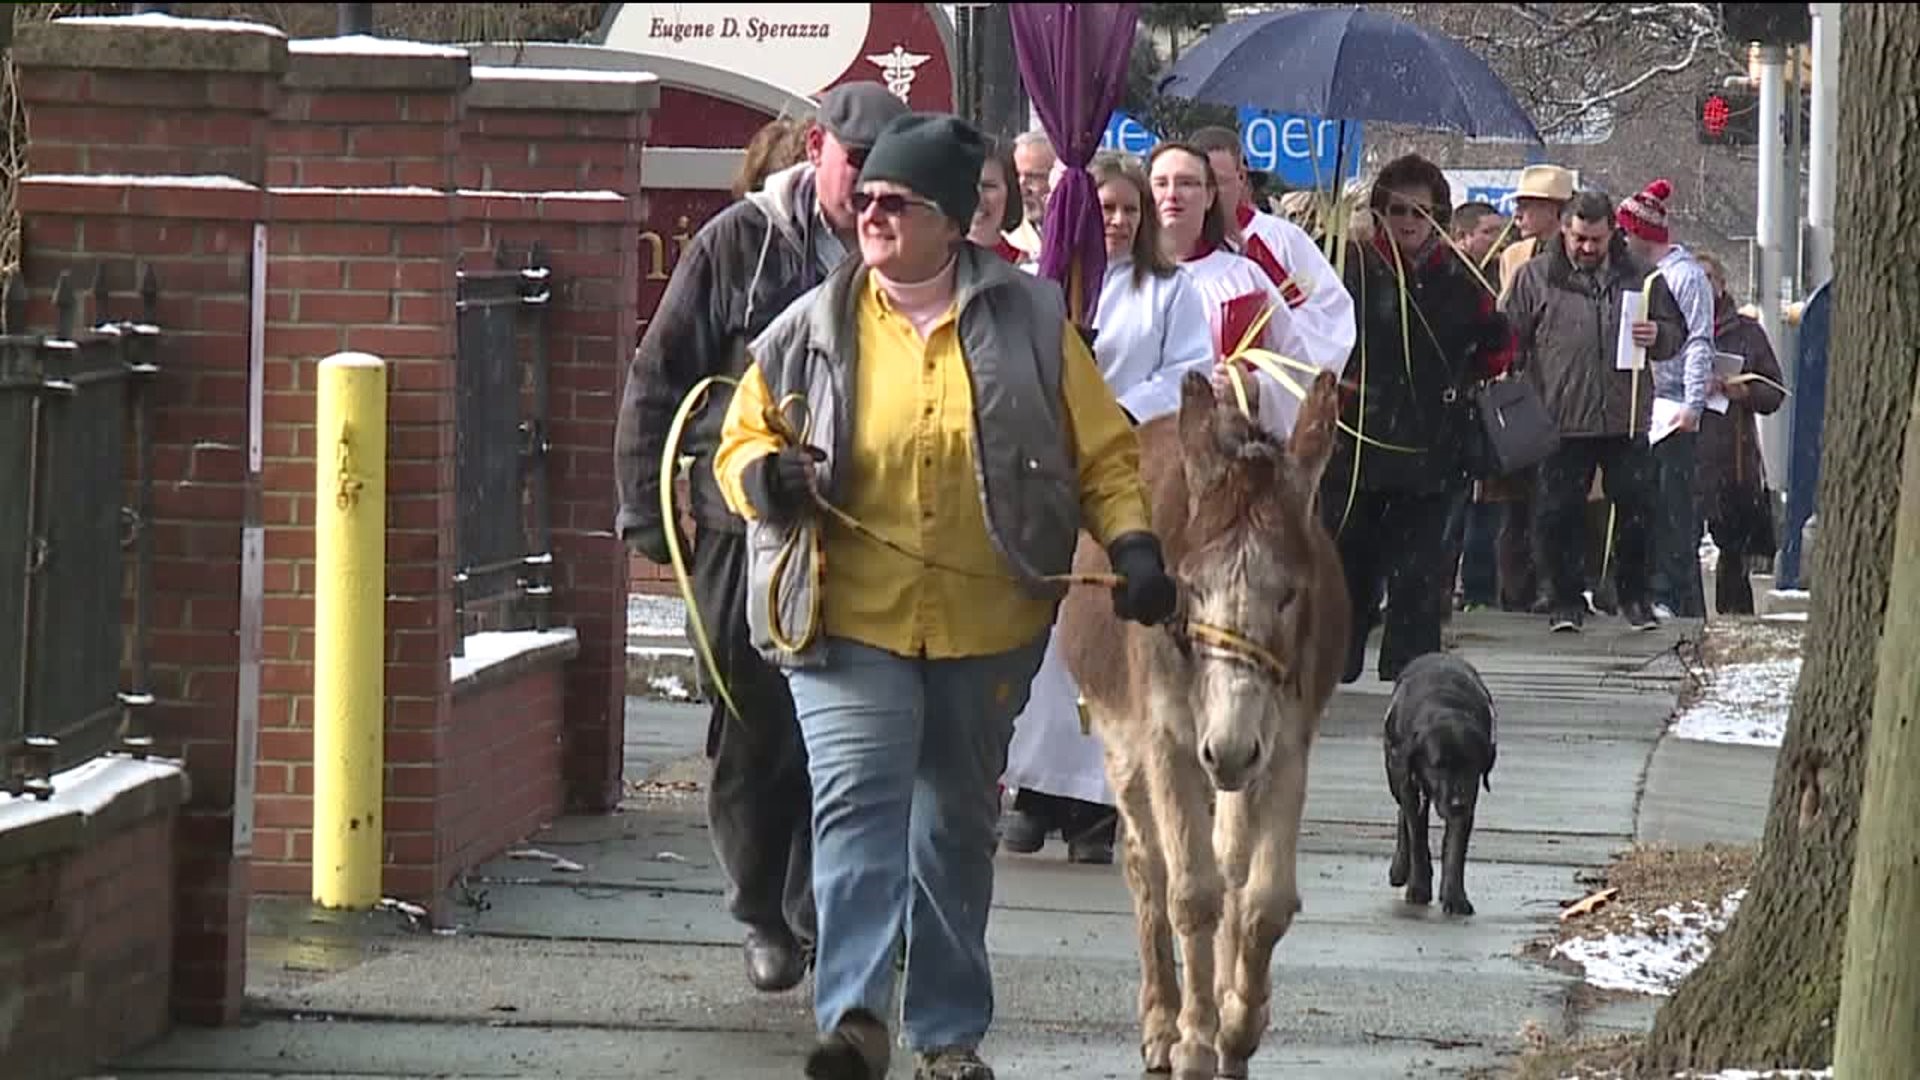 Palm Sunday Procession in Luzerne County